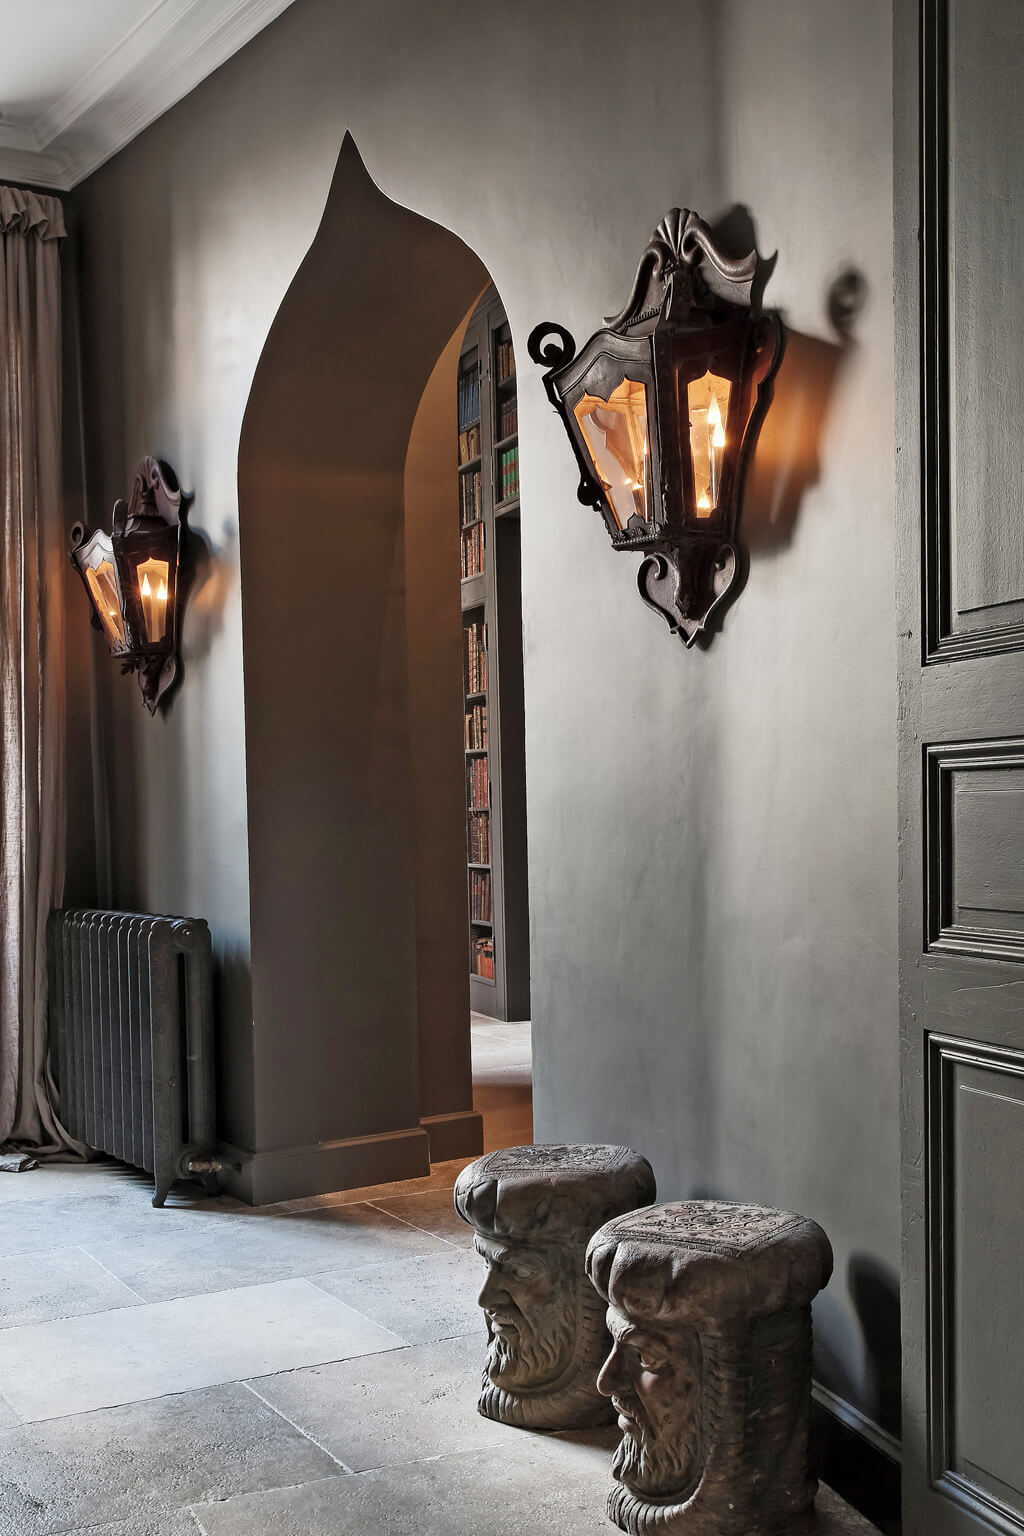 Deep and dark, French gray walls add drama in an Avignon mansion's hall. Come see a Breathtaking French Château Tour in Provence With Photo Gallery of Historical Architecture, Dramatic Eclectic Interiors & Oddities!